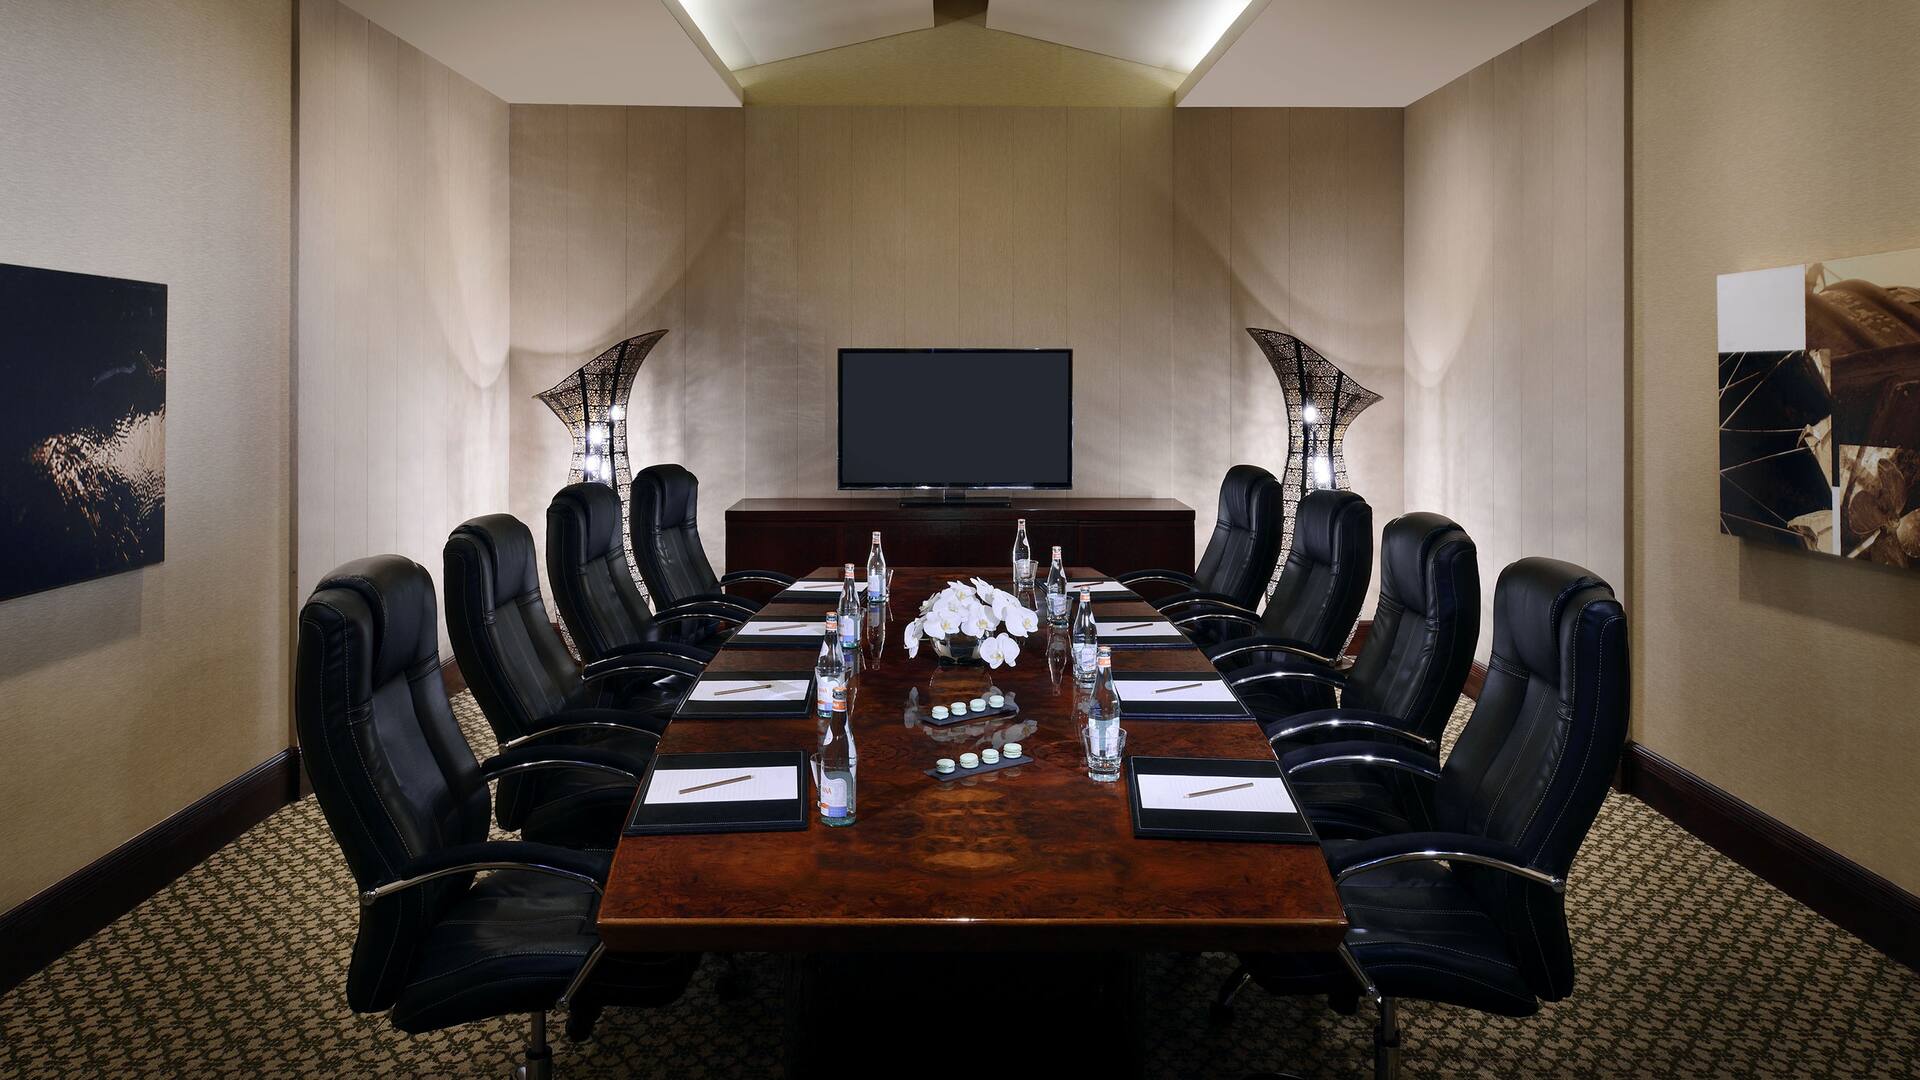  Elevate Your Business with Meeting Rooms in Dubai